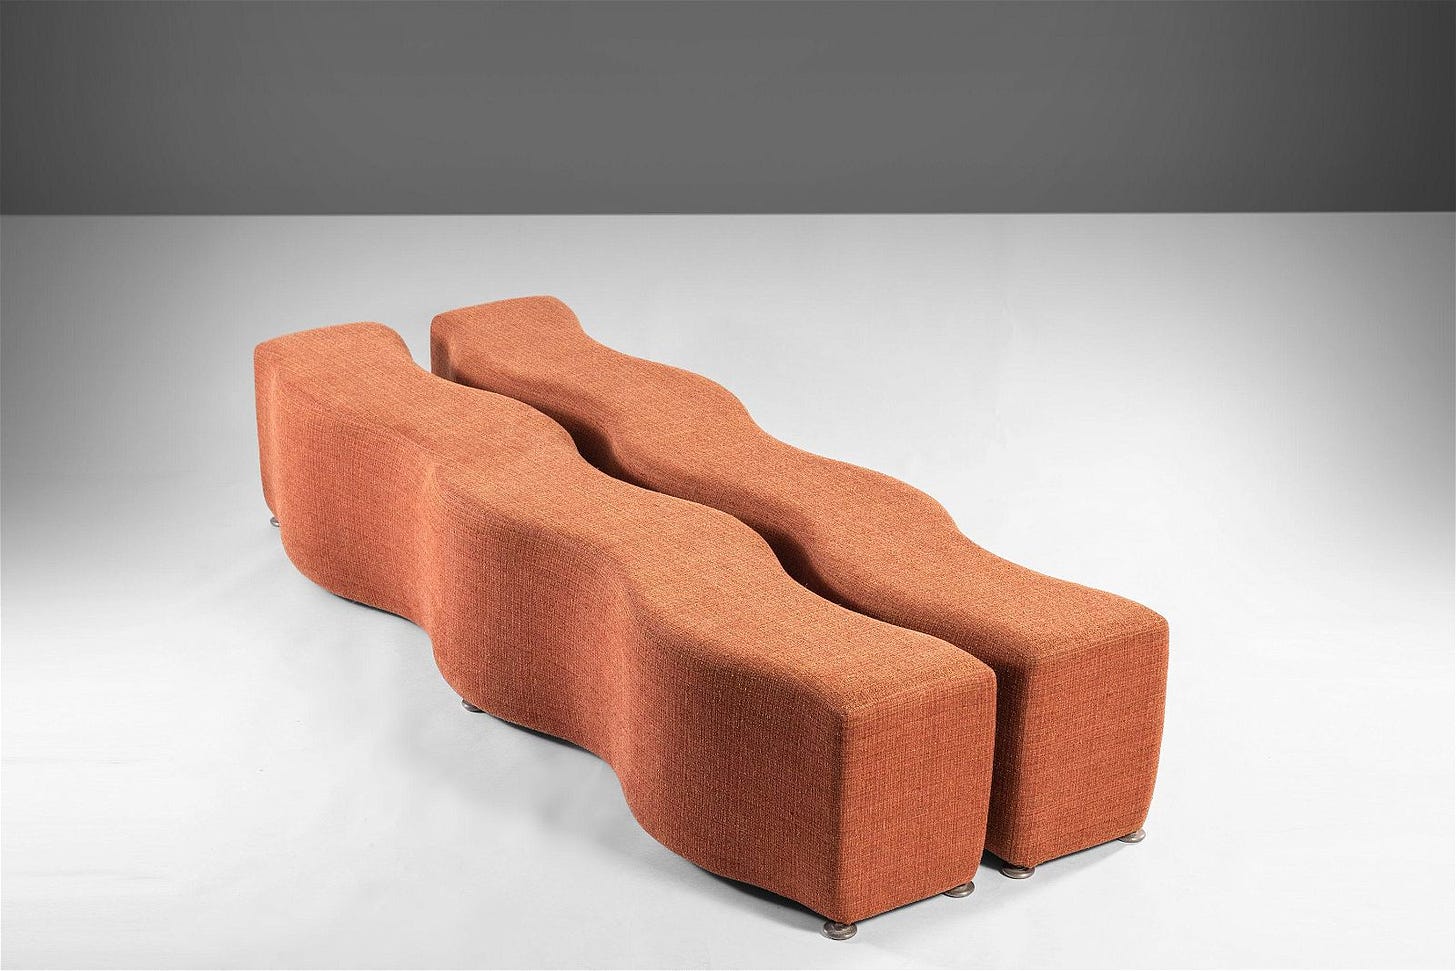 Ripple Bench by Laurinda Spear for Brayton International USA - 2 Available - Price Per Piece